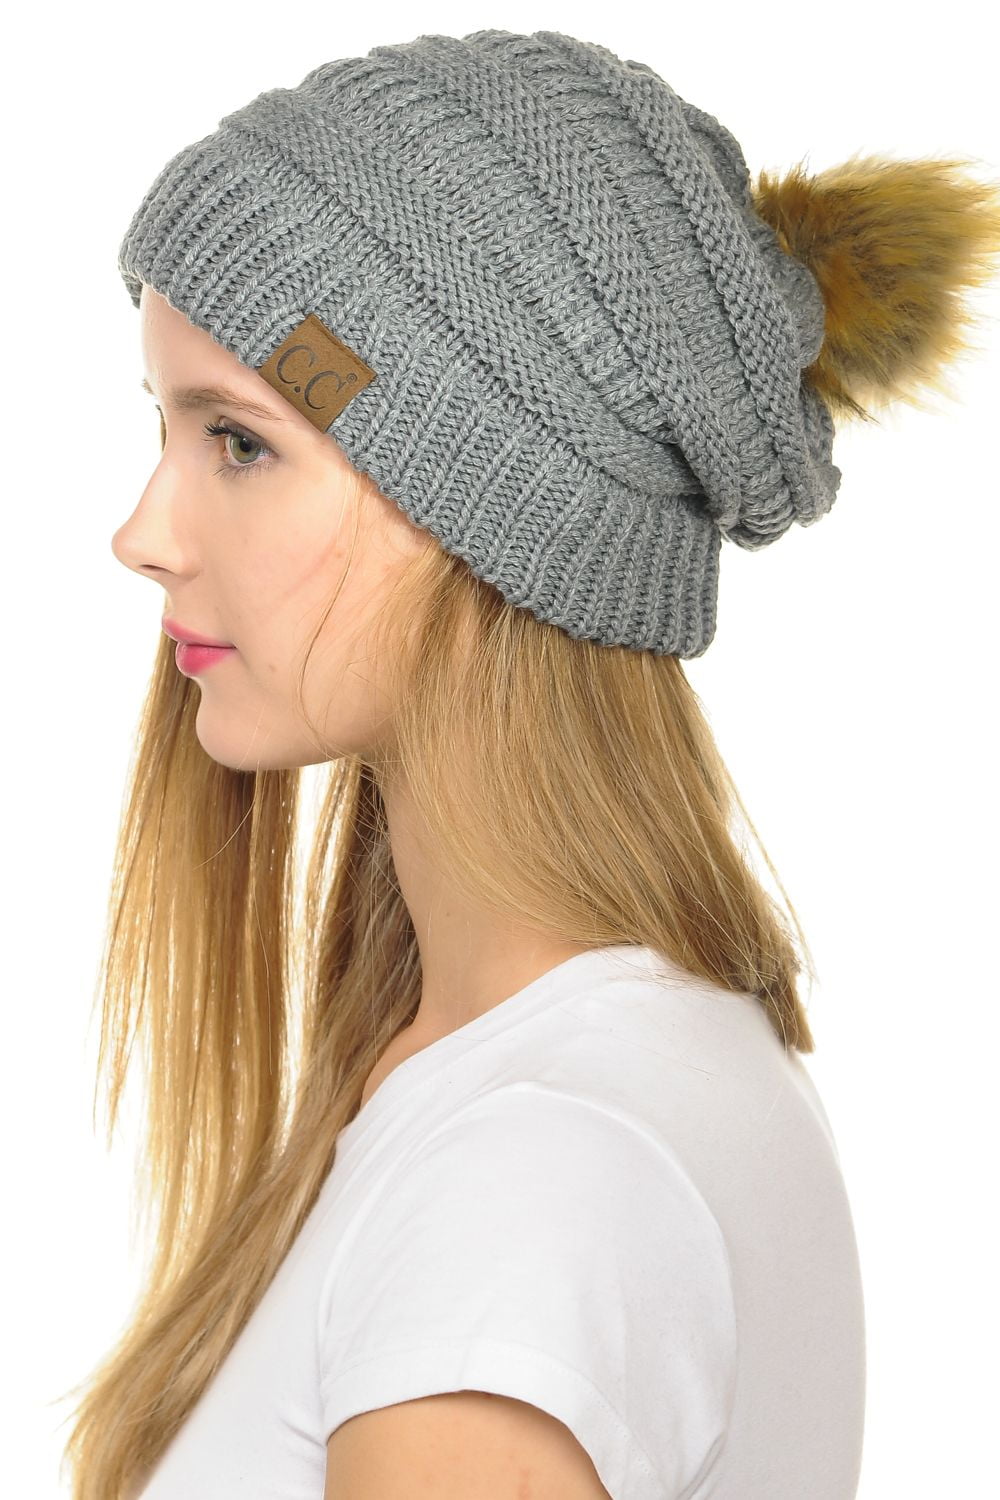 Details about   Fleece Unisex Knit Baggy Beanie Winter Ski Slouchy Cuff Cap Solid Hat Skull 